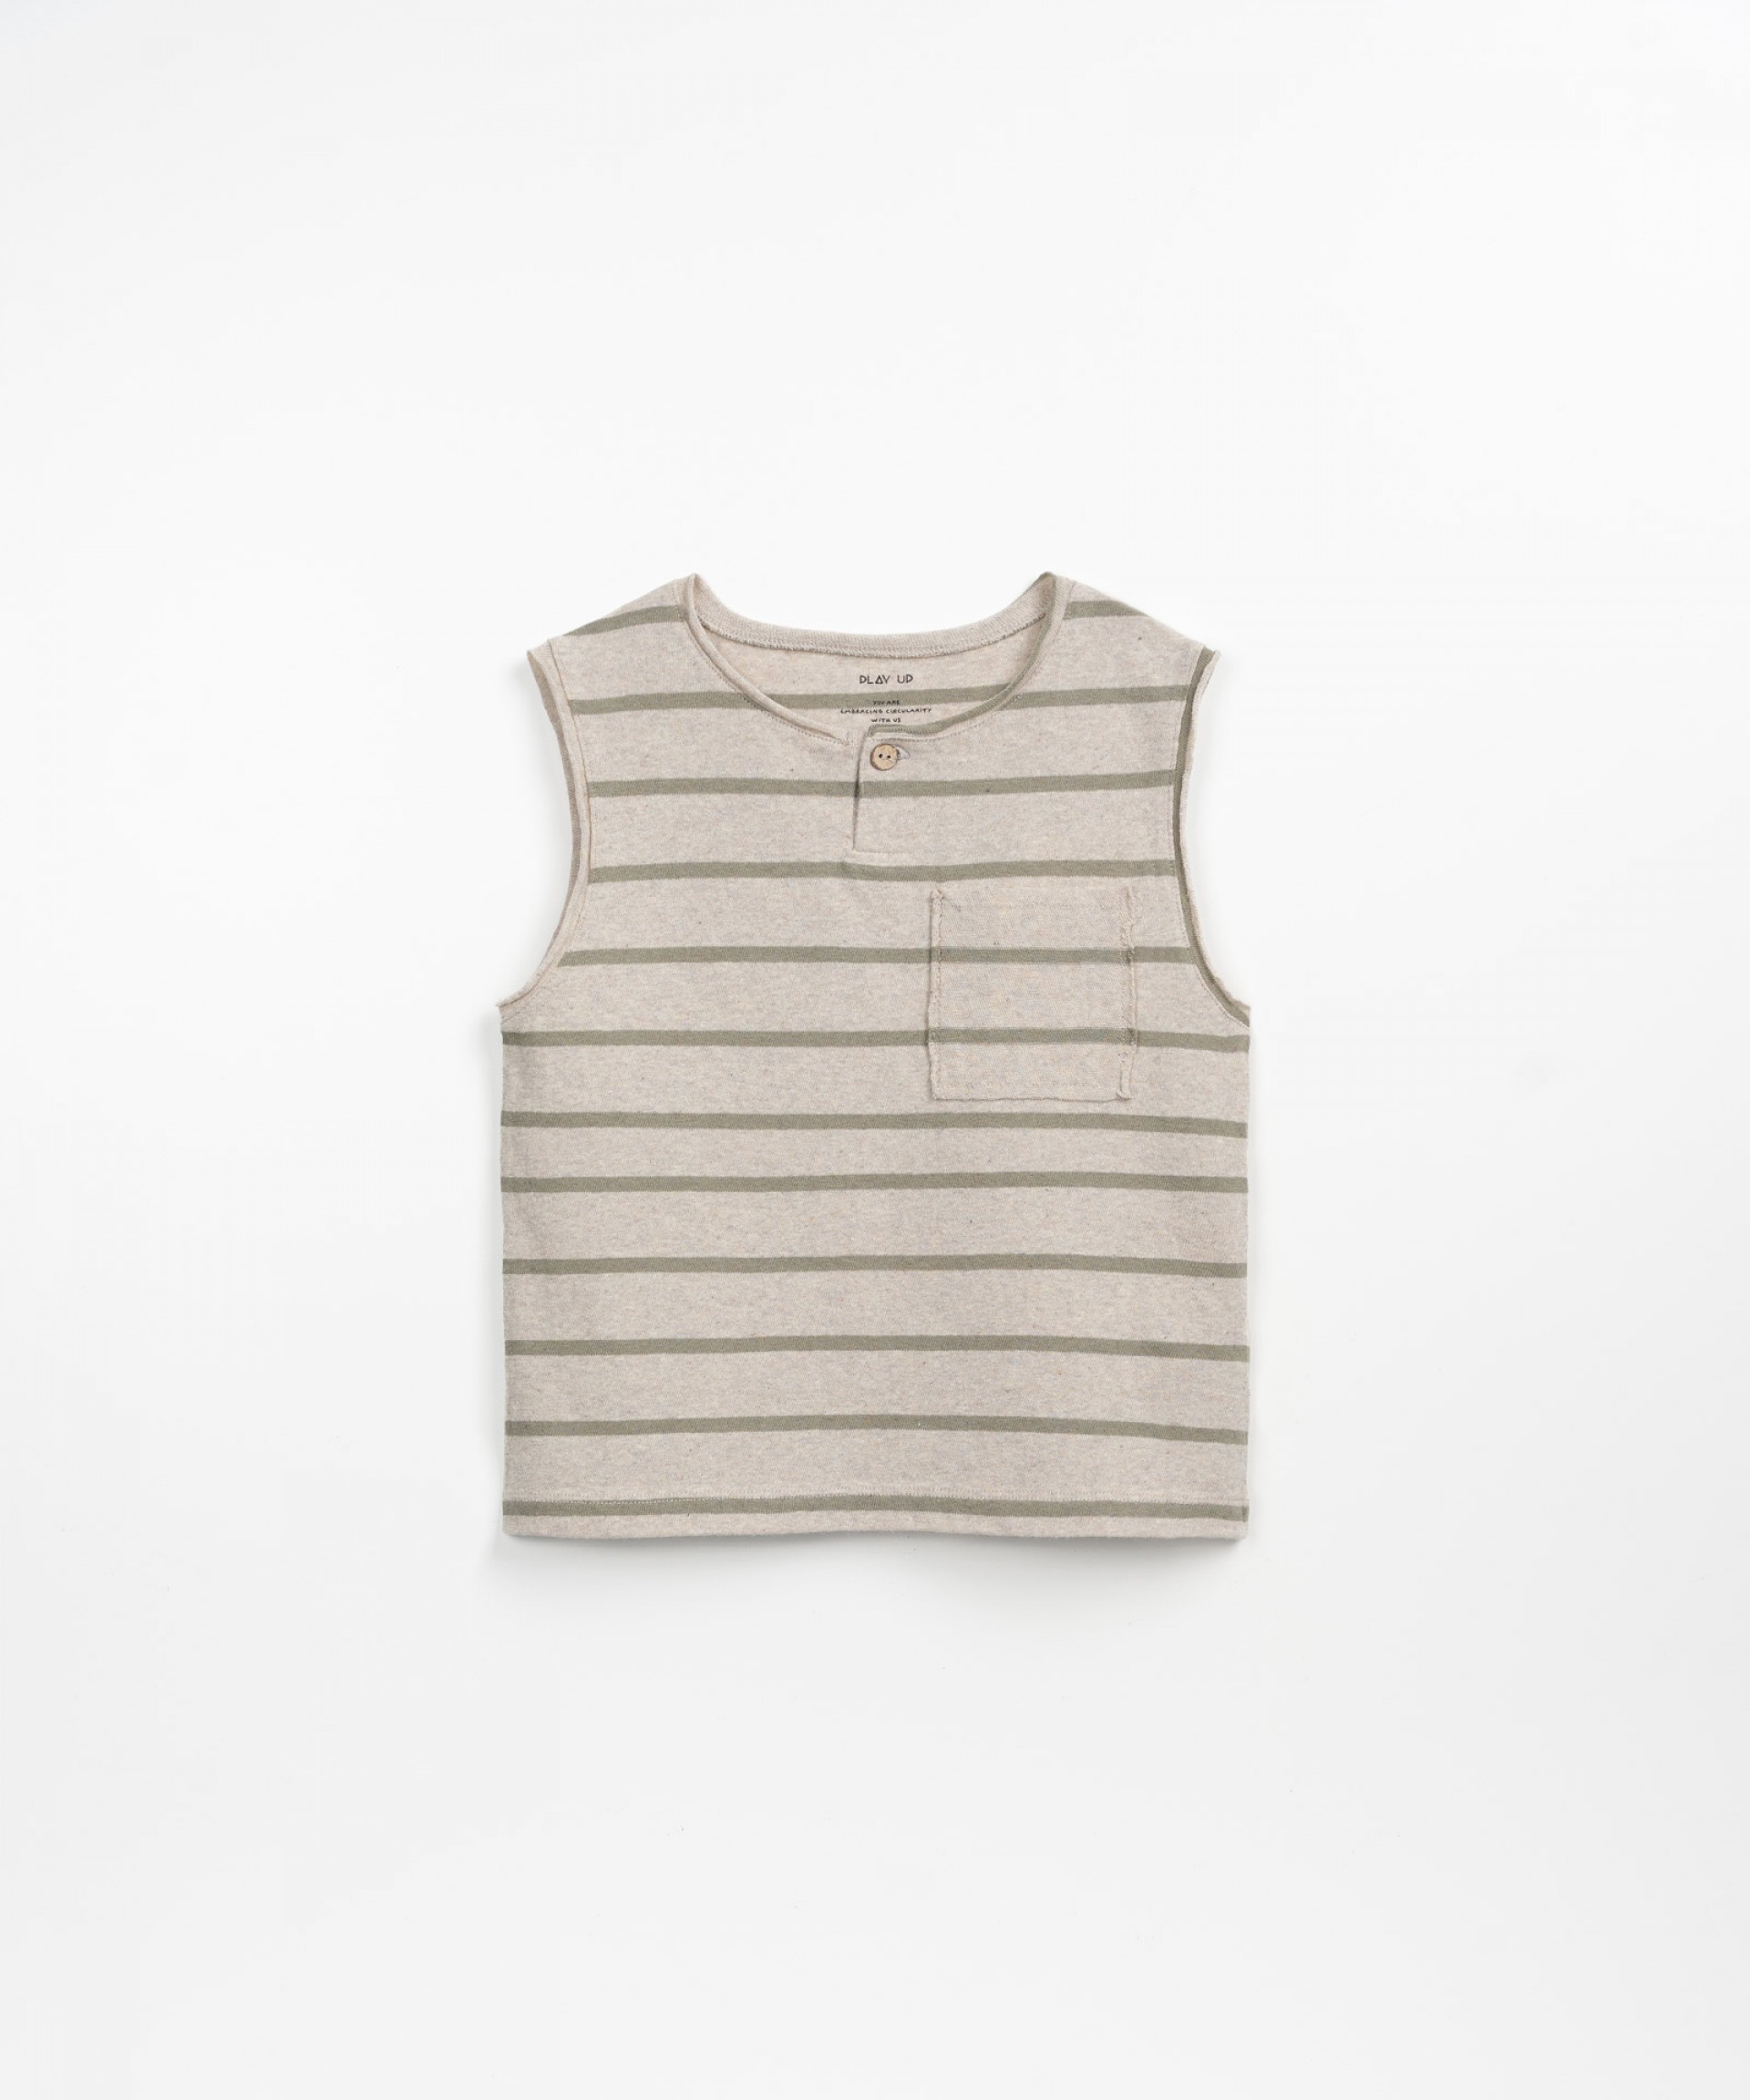 Sleeveless T-shirt with front opening | Textile Art